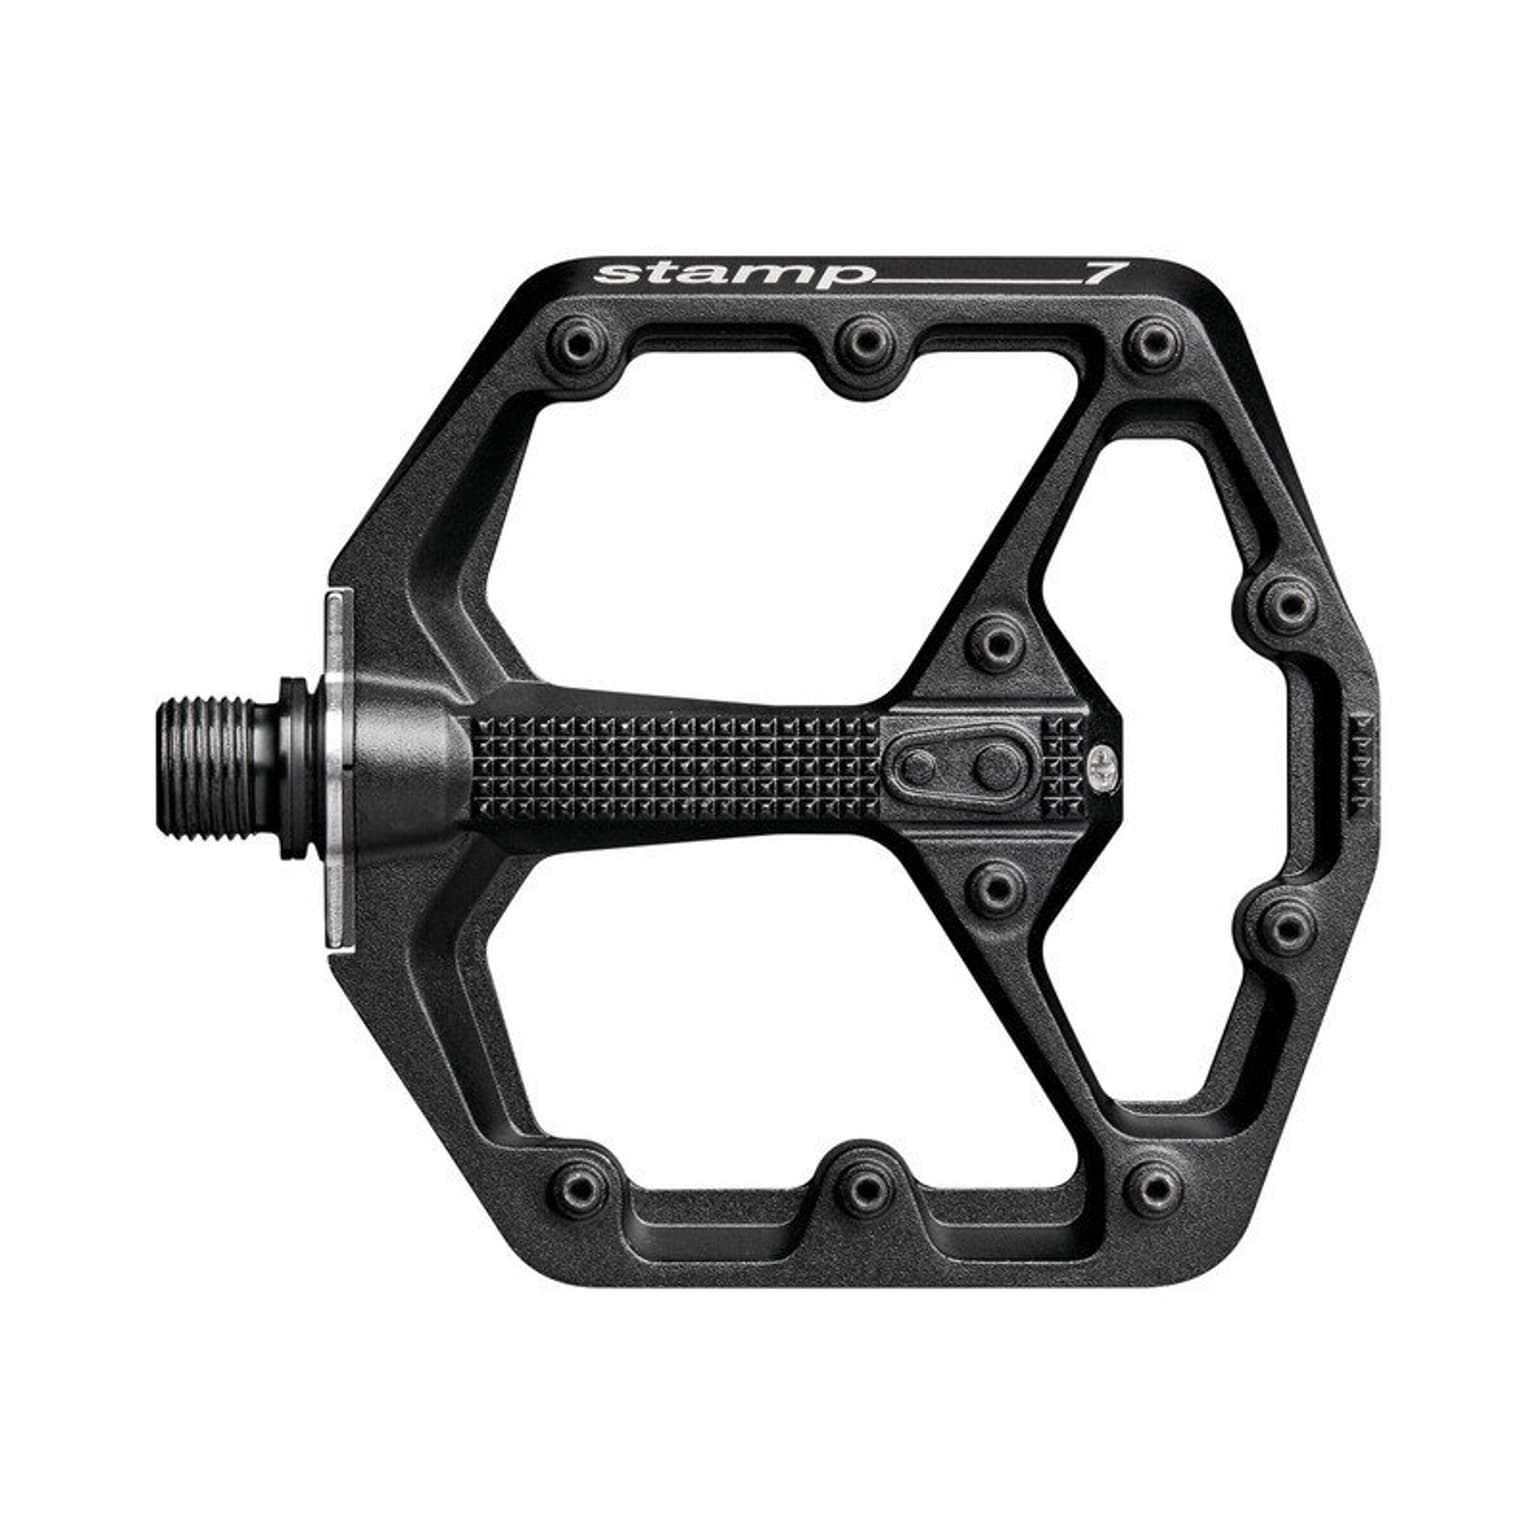 crankbrothers crankbrothers Pedal Stamp 7 small Pedale 1